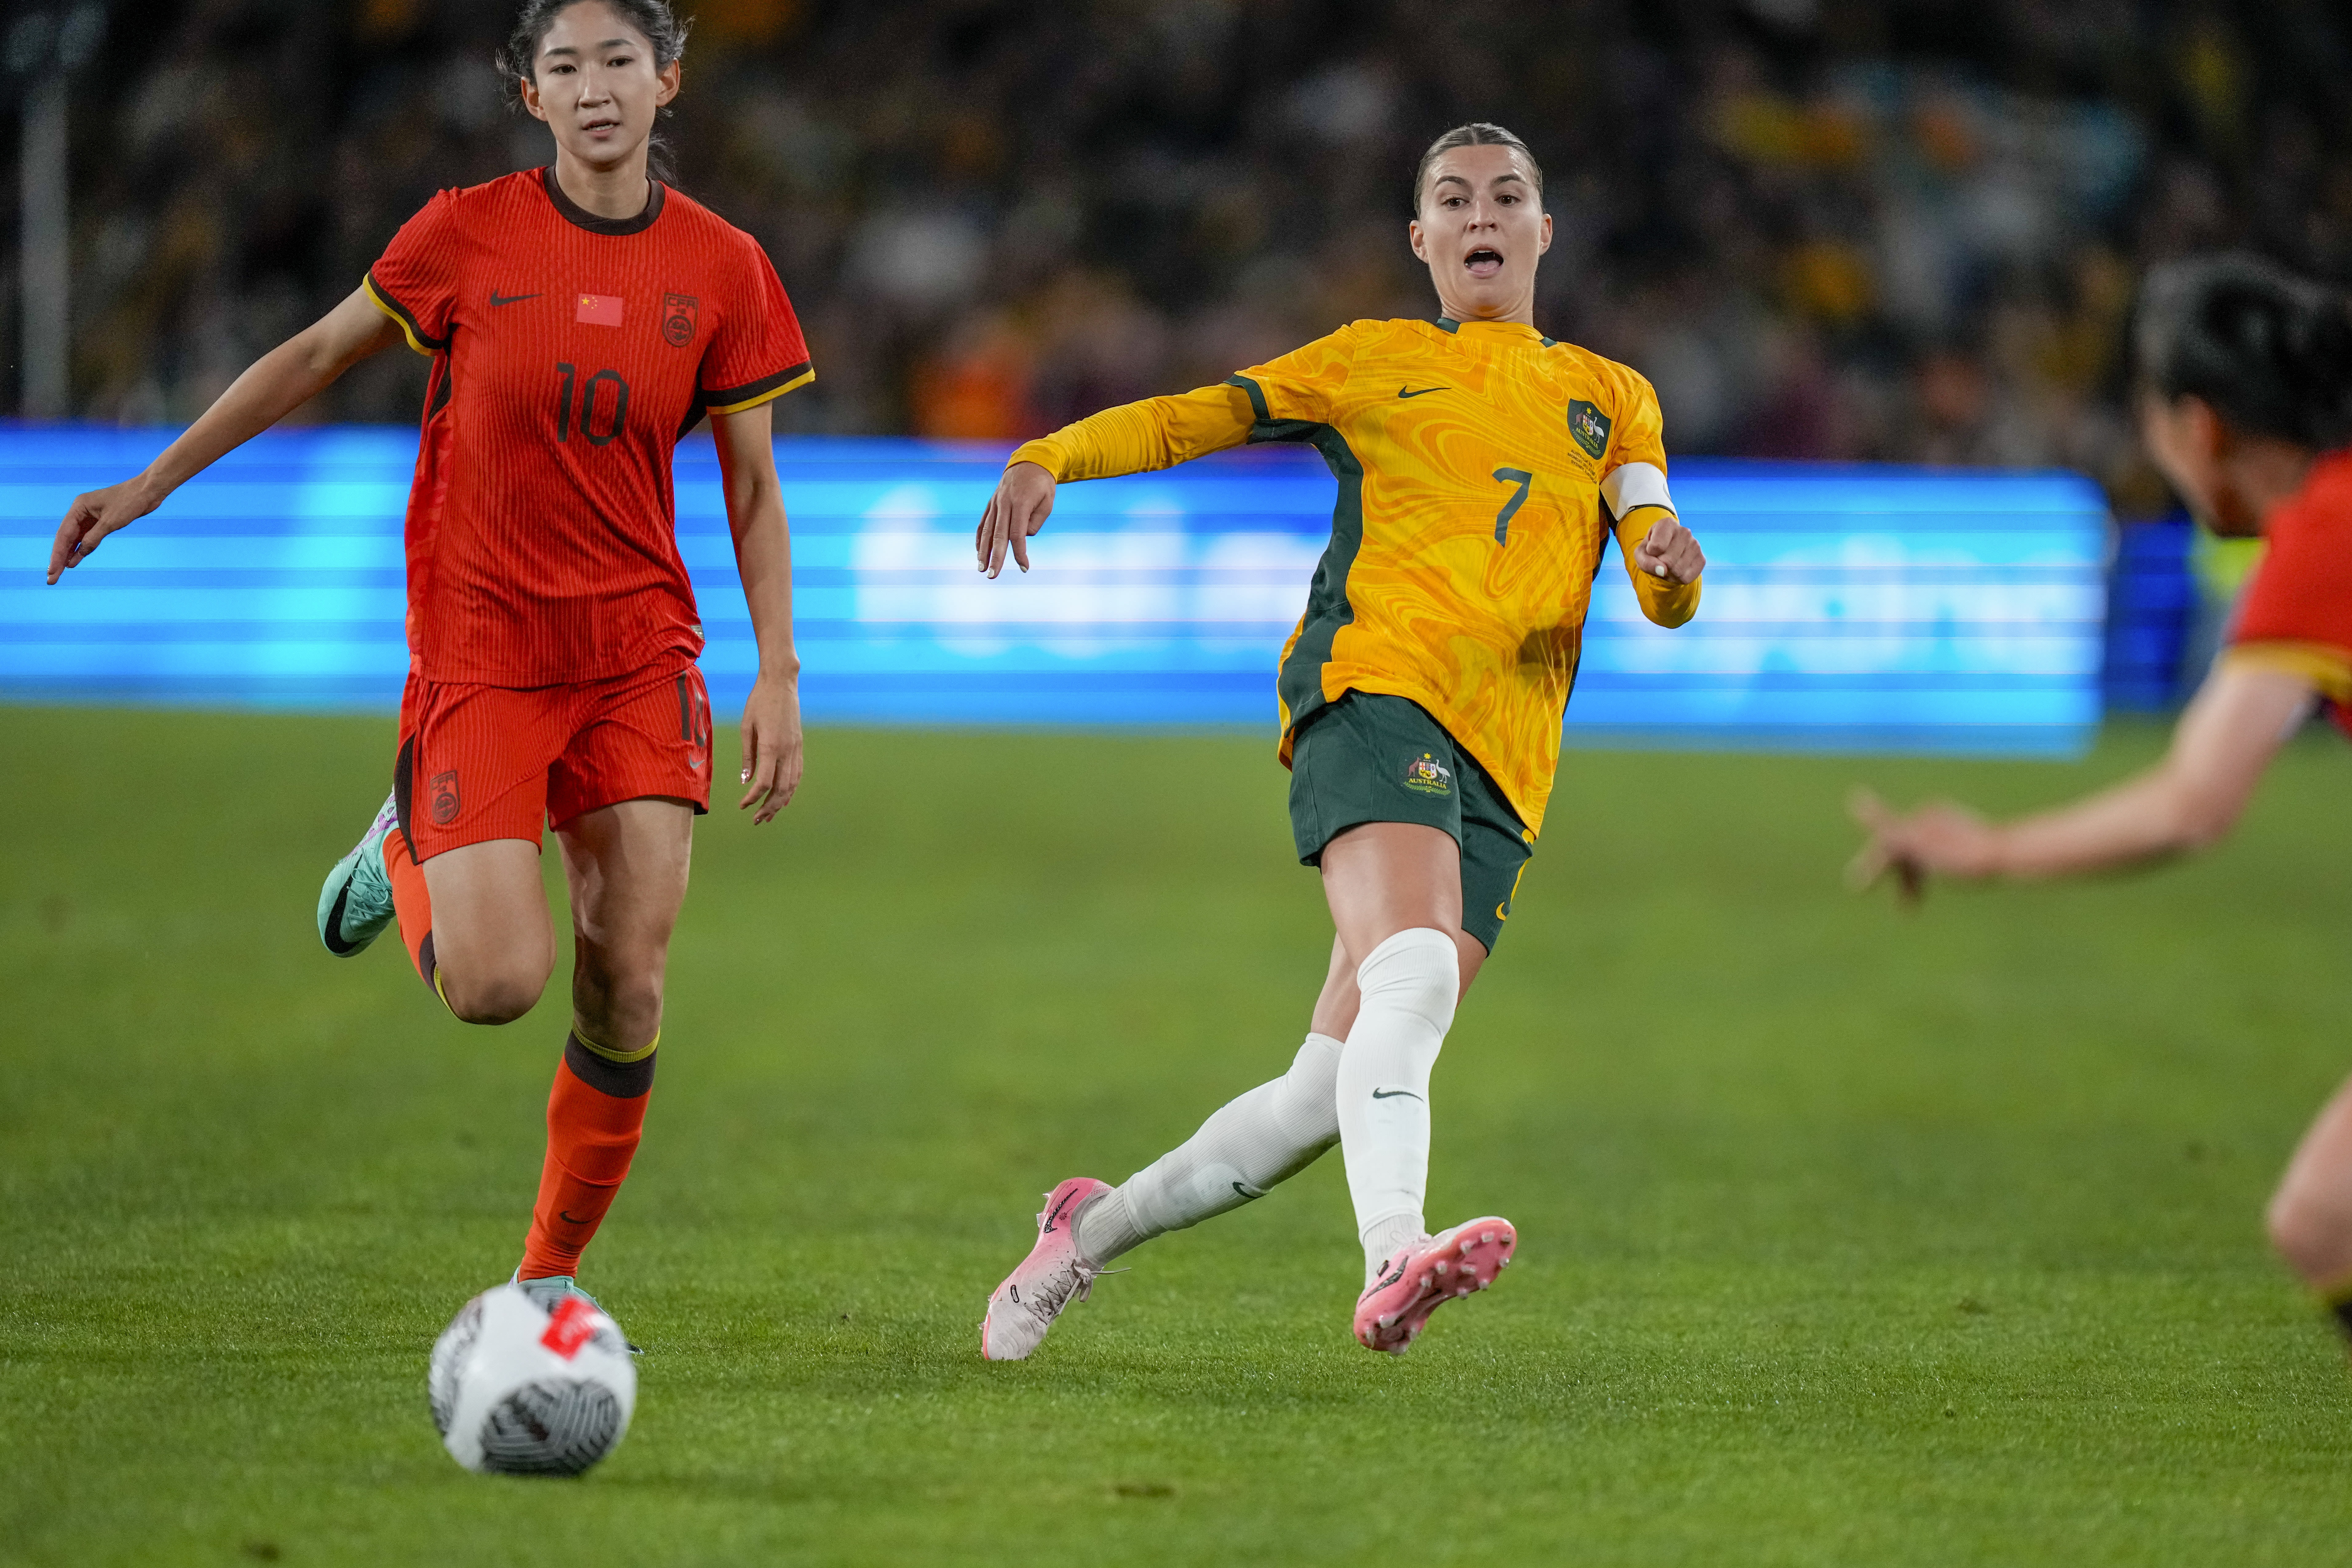 Catley to lead Australia's women's soccer squad at the Paris Olympics in the absence of Sam Kerr